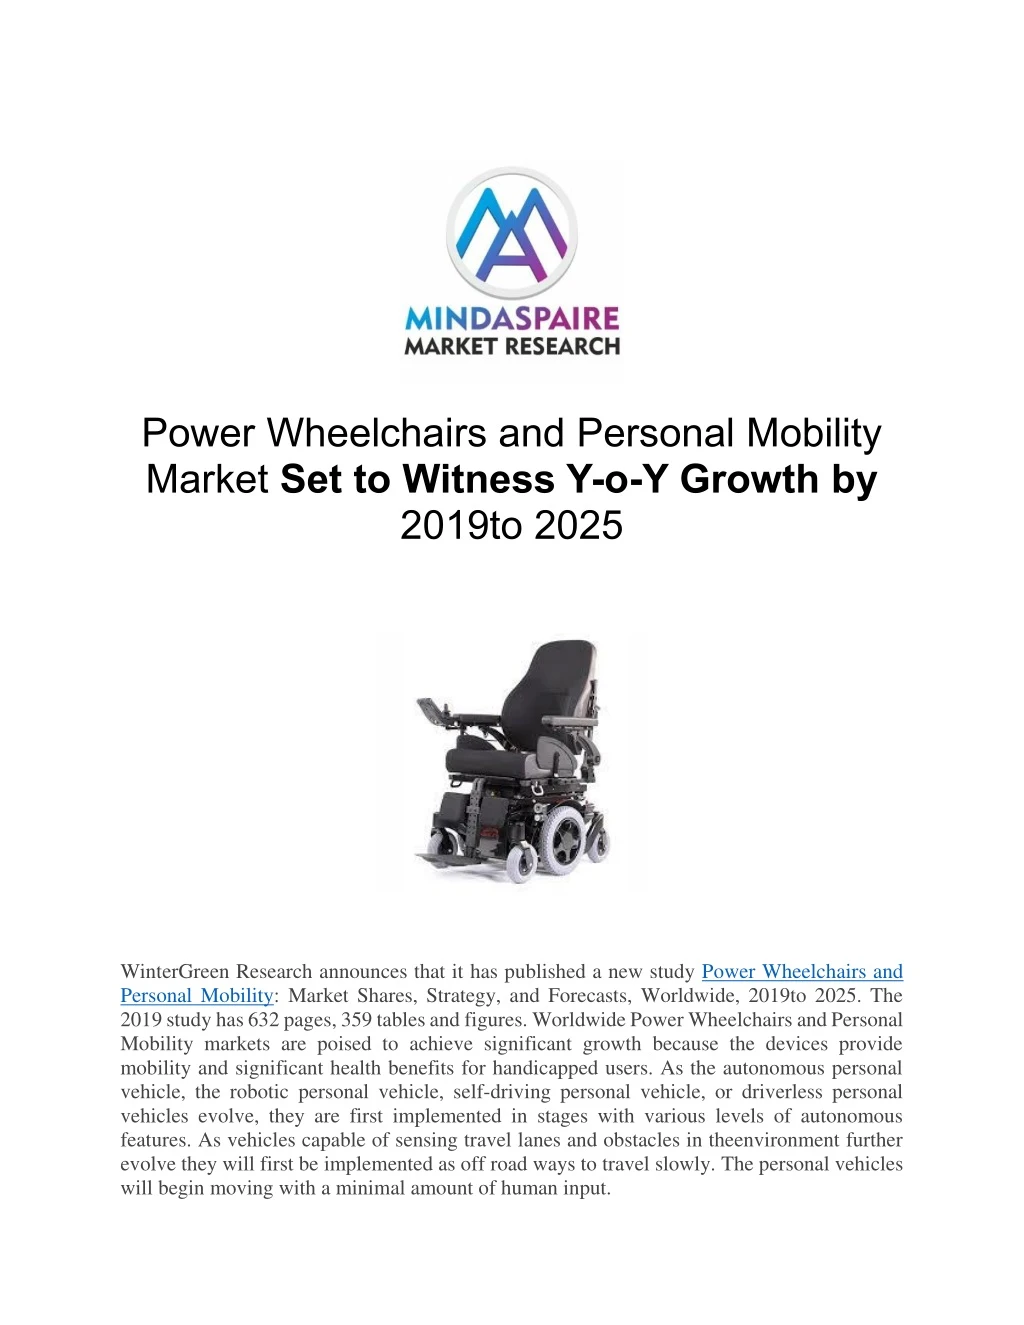 power wheelchairs and personal mobility market